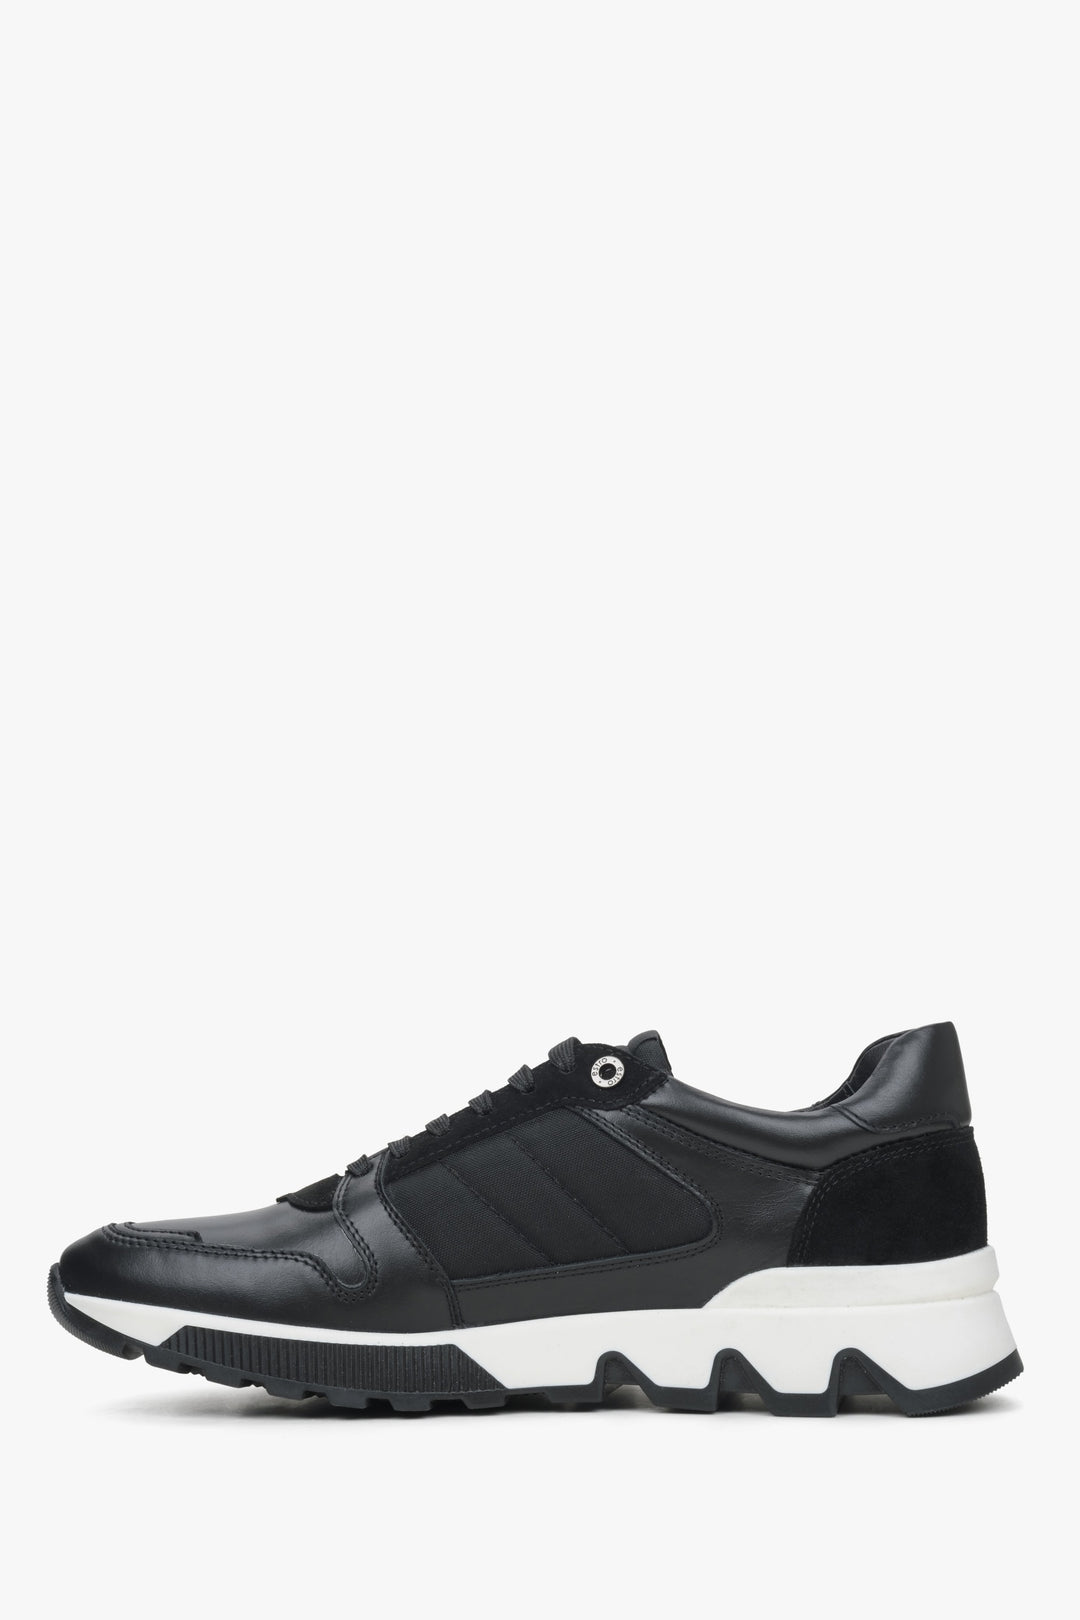 Men's black leather and velour sneakers - shoe profile.